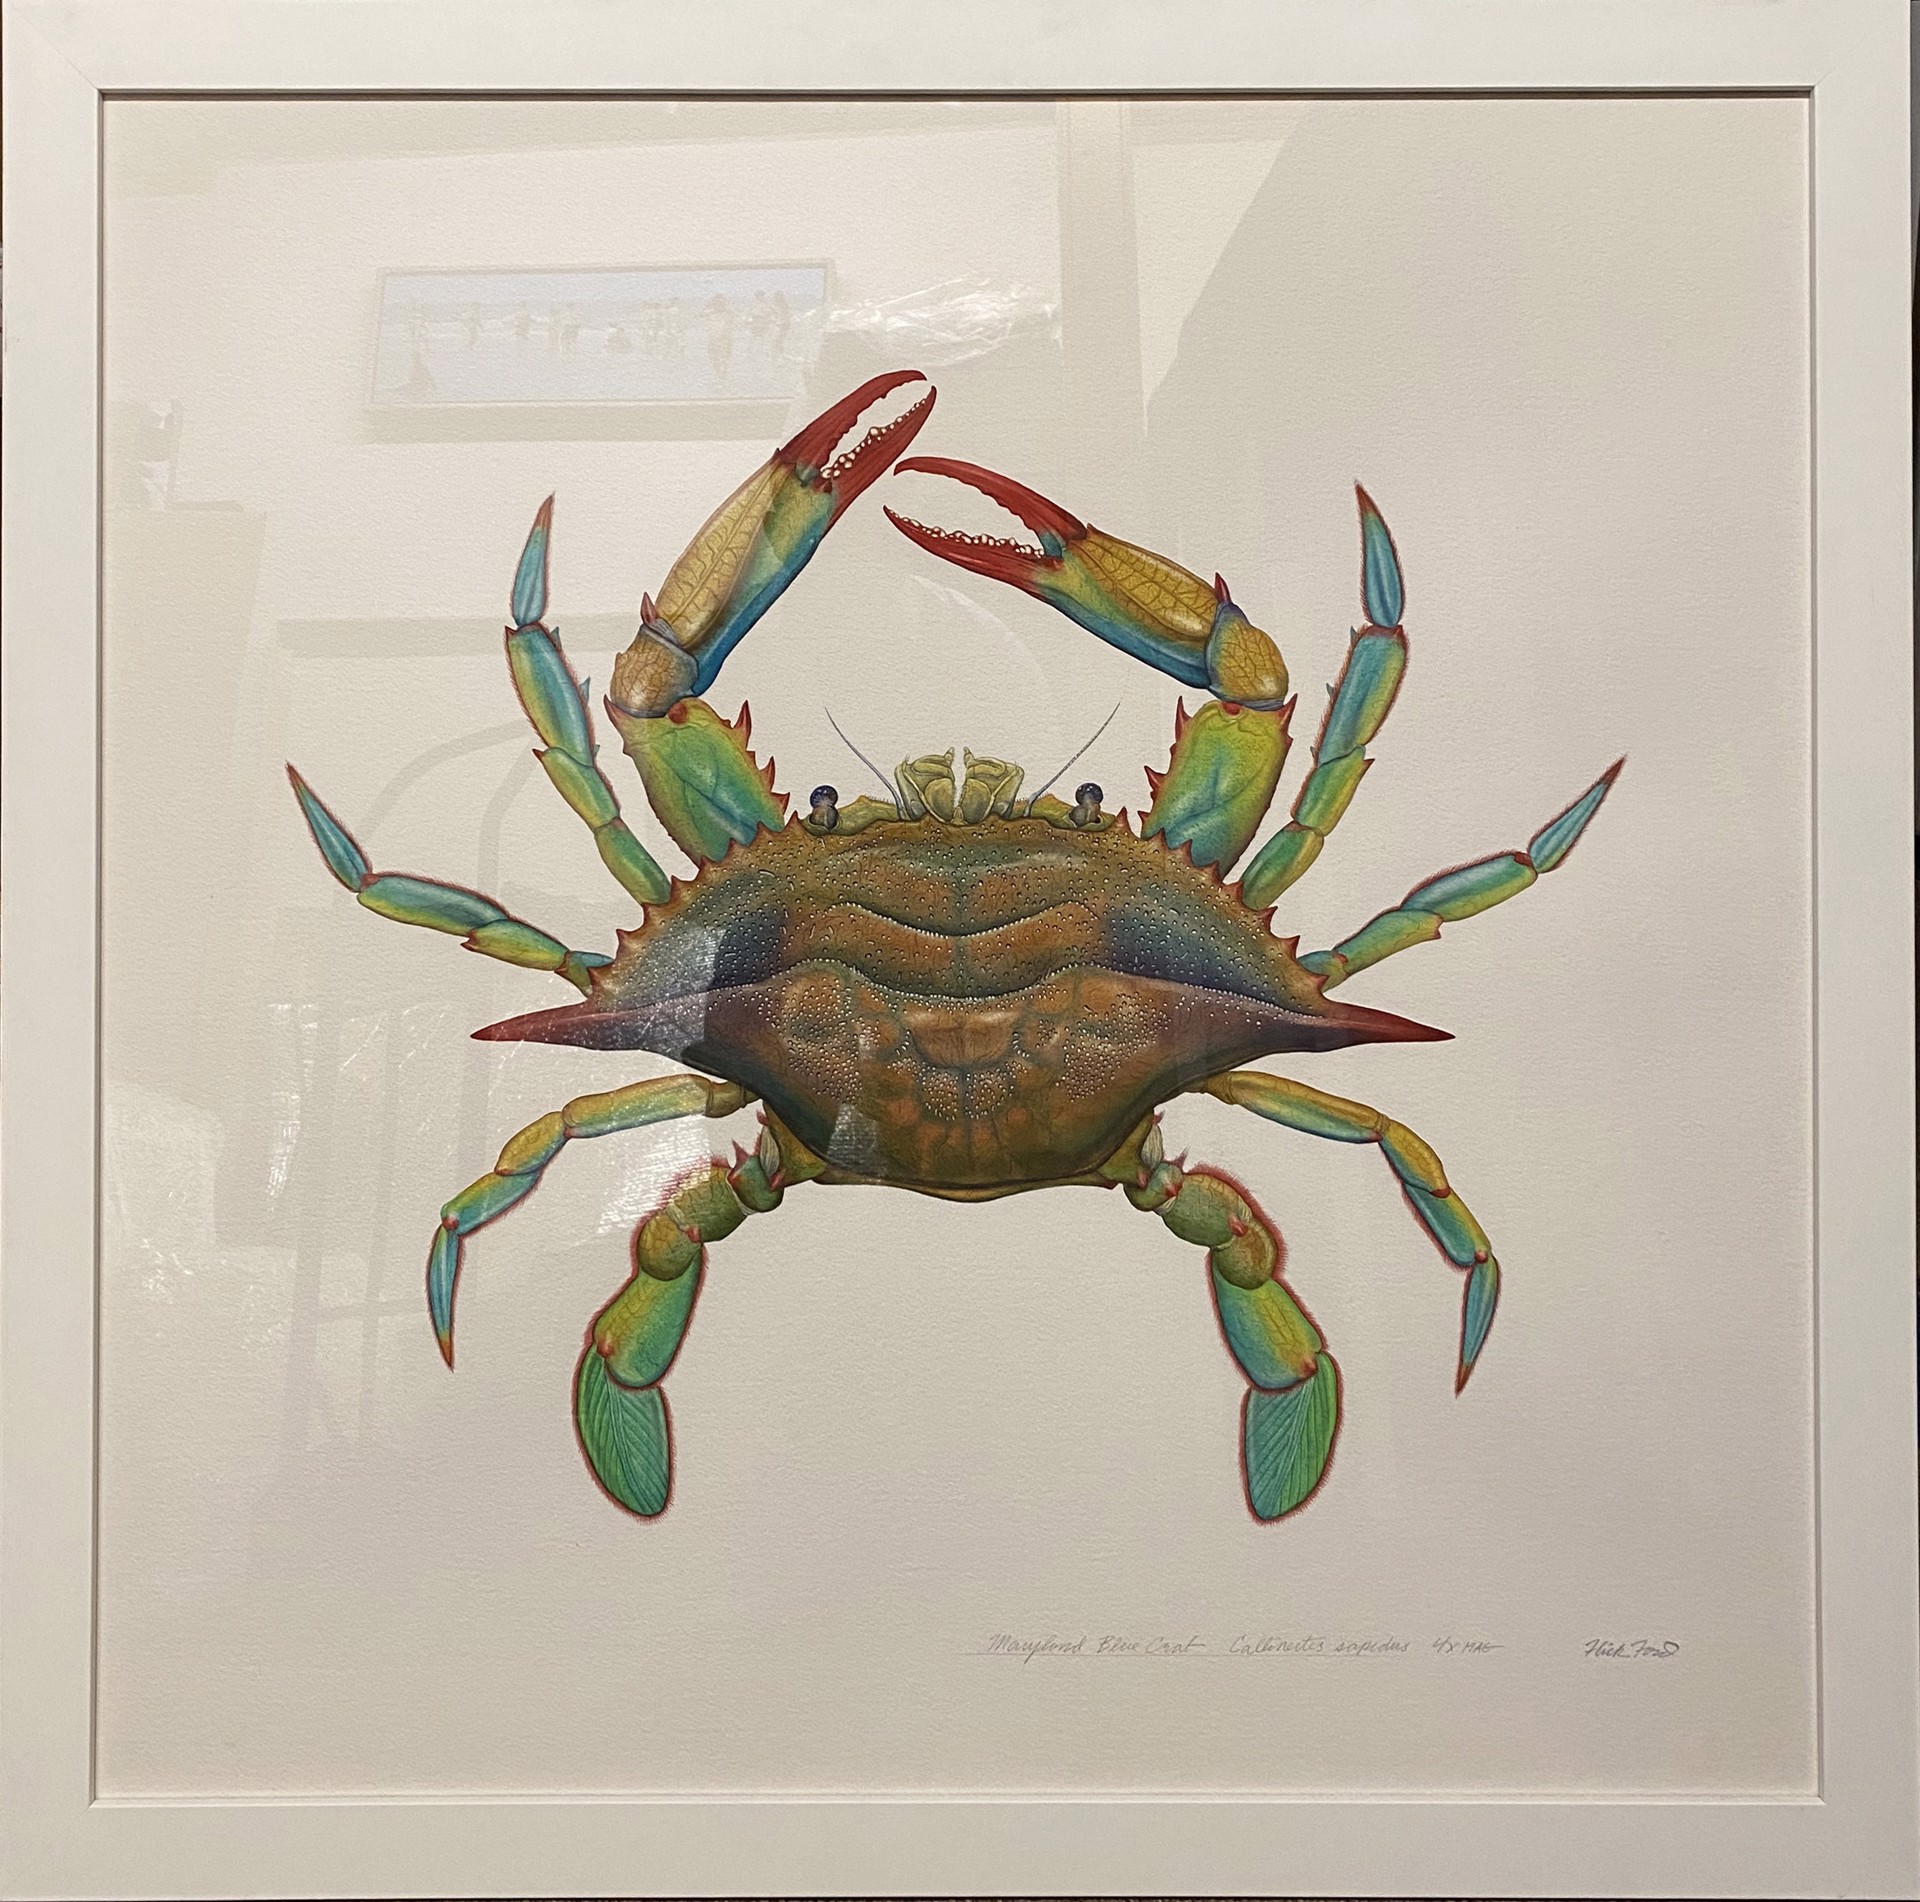 Maryland Blue Crab Callinectes sapidus 4X Mag by Flick Ford